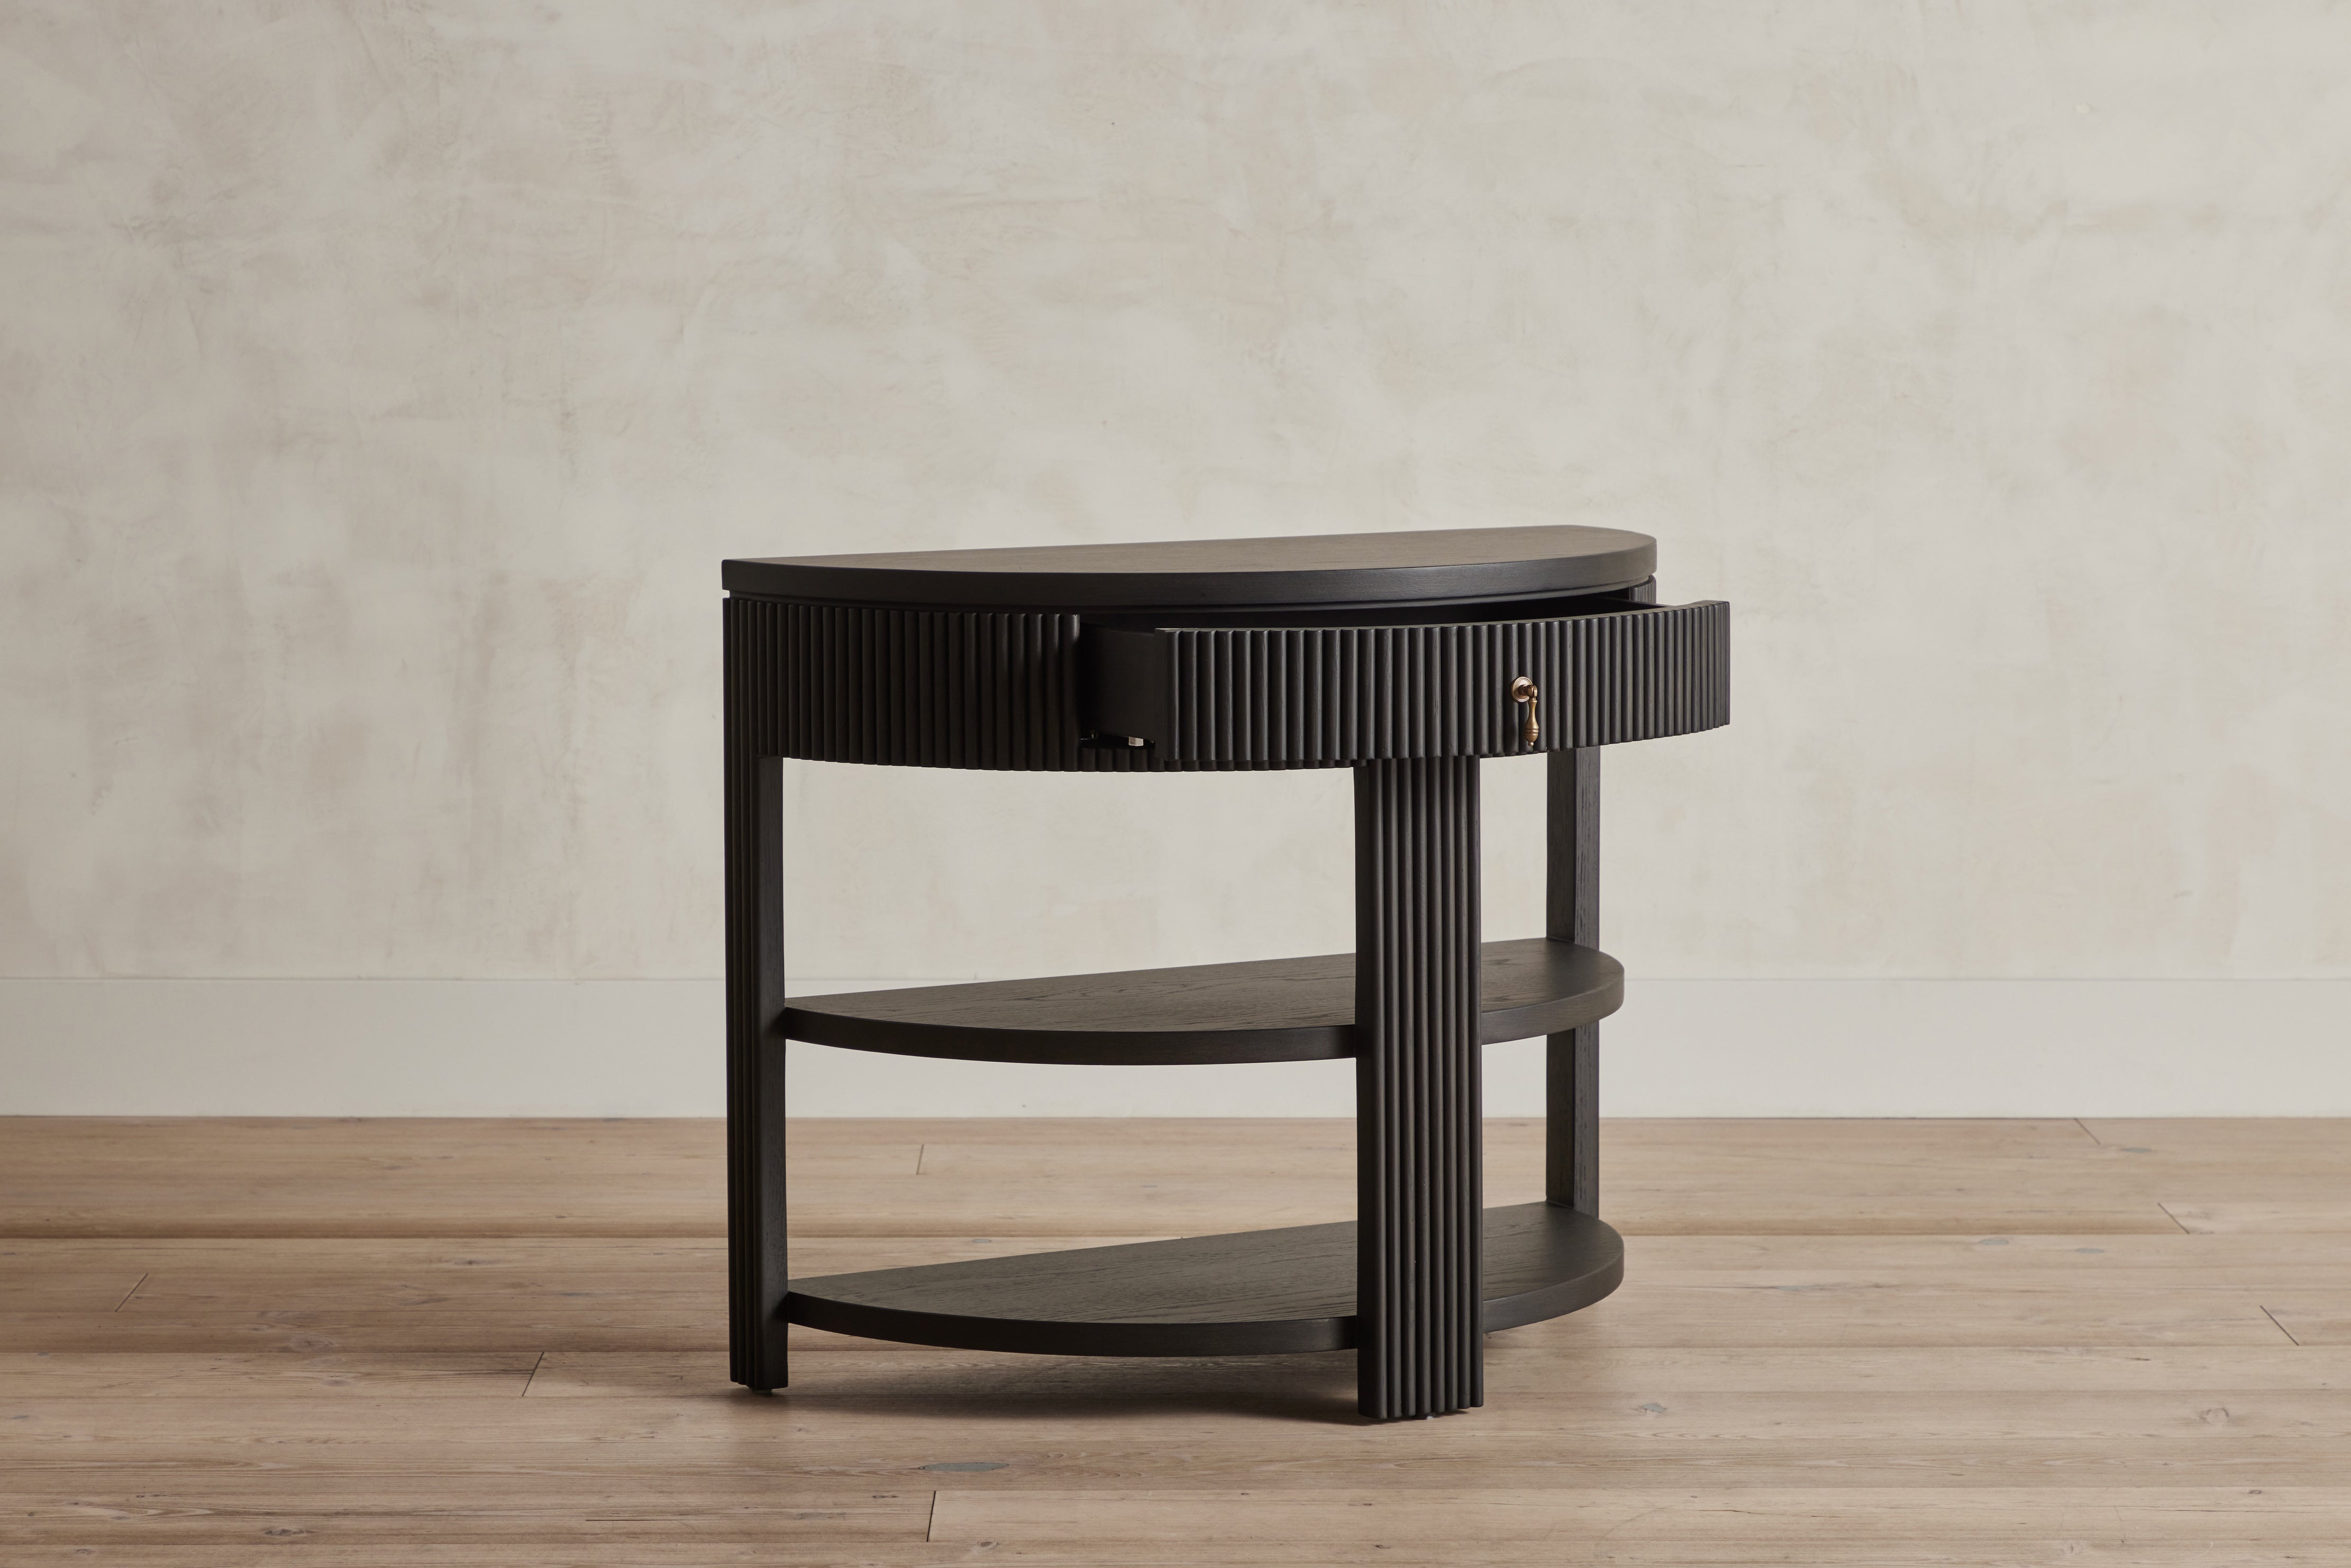 Shown in Ebony with Wood Top|AS SHOWN $4,600